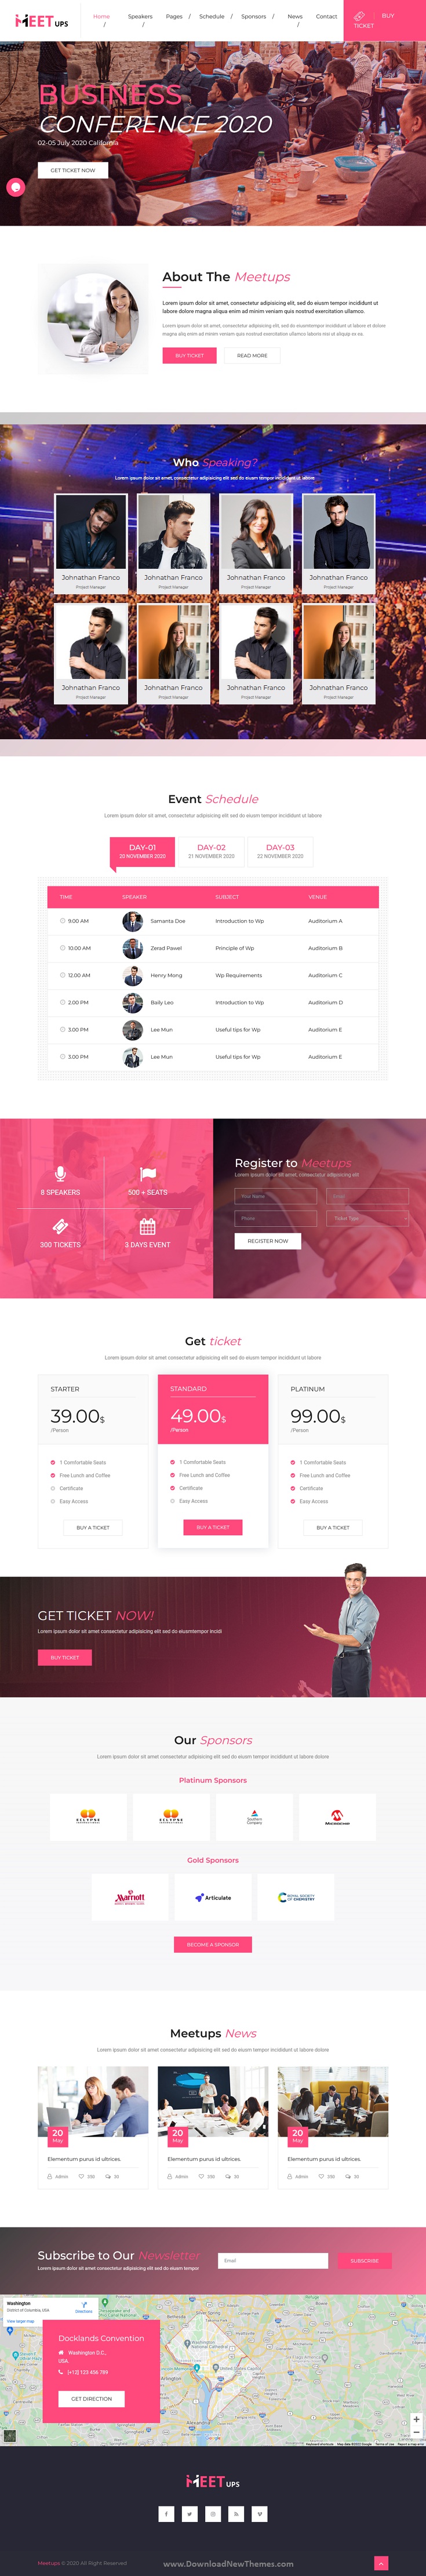 Meetups - Conference & Event HTML Template